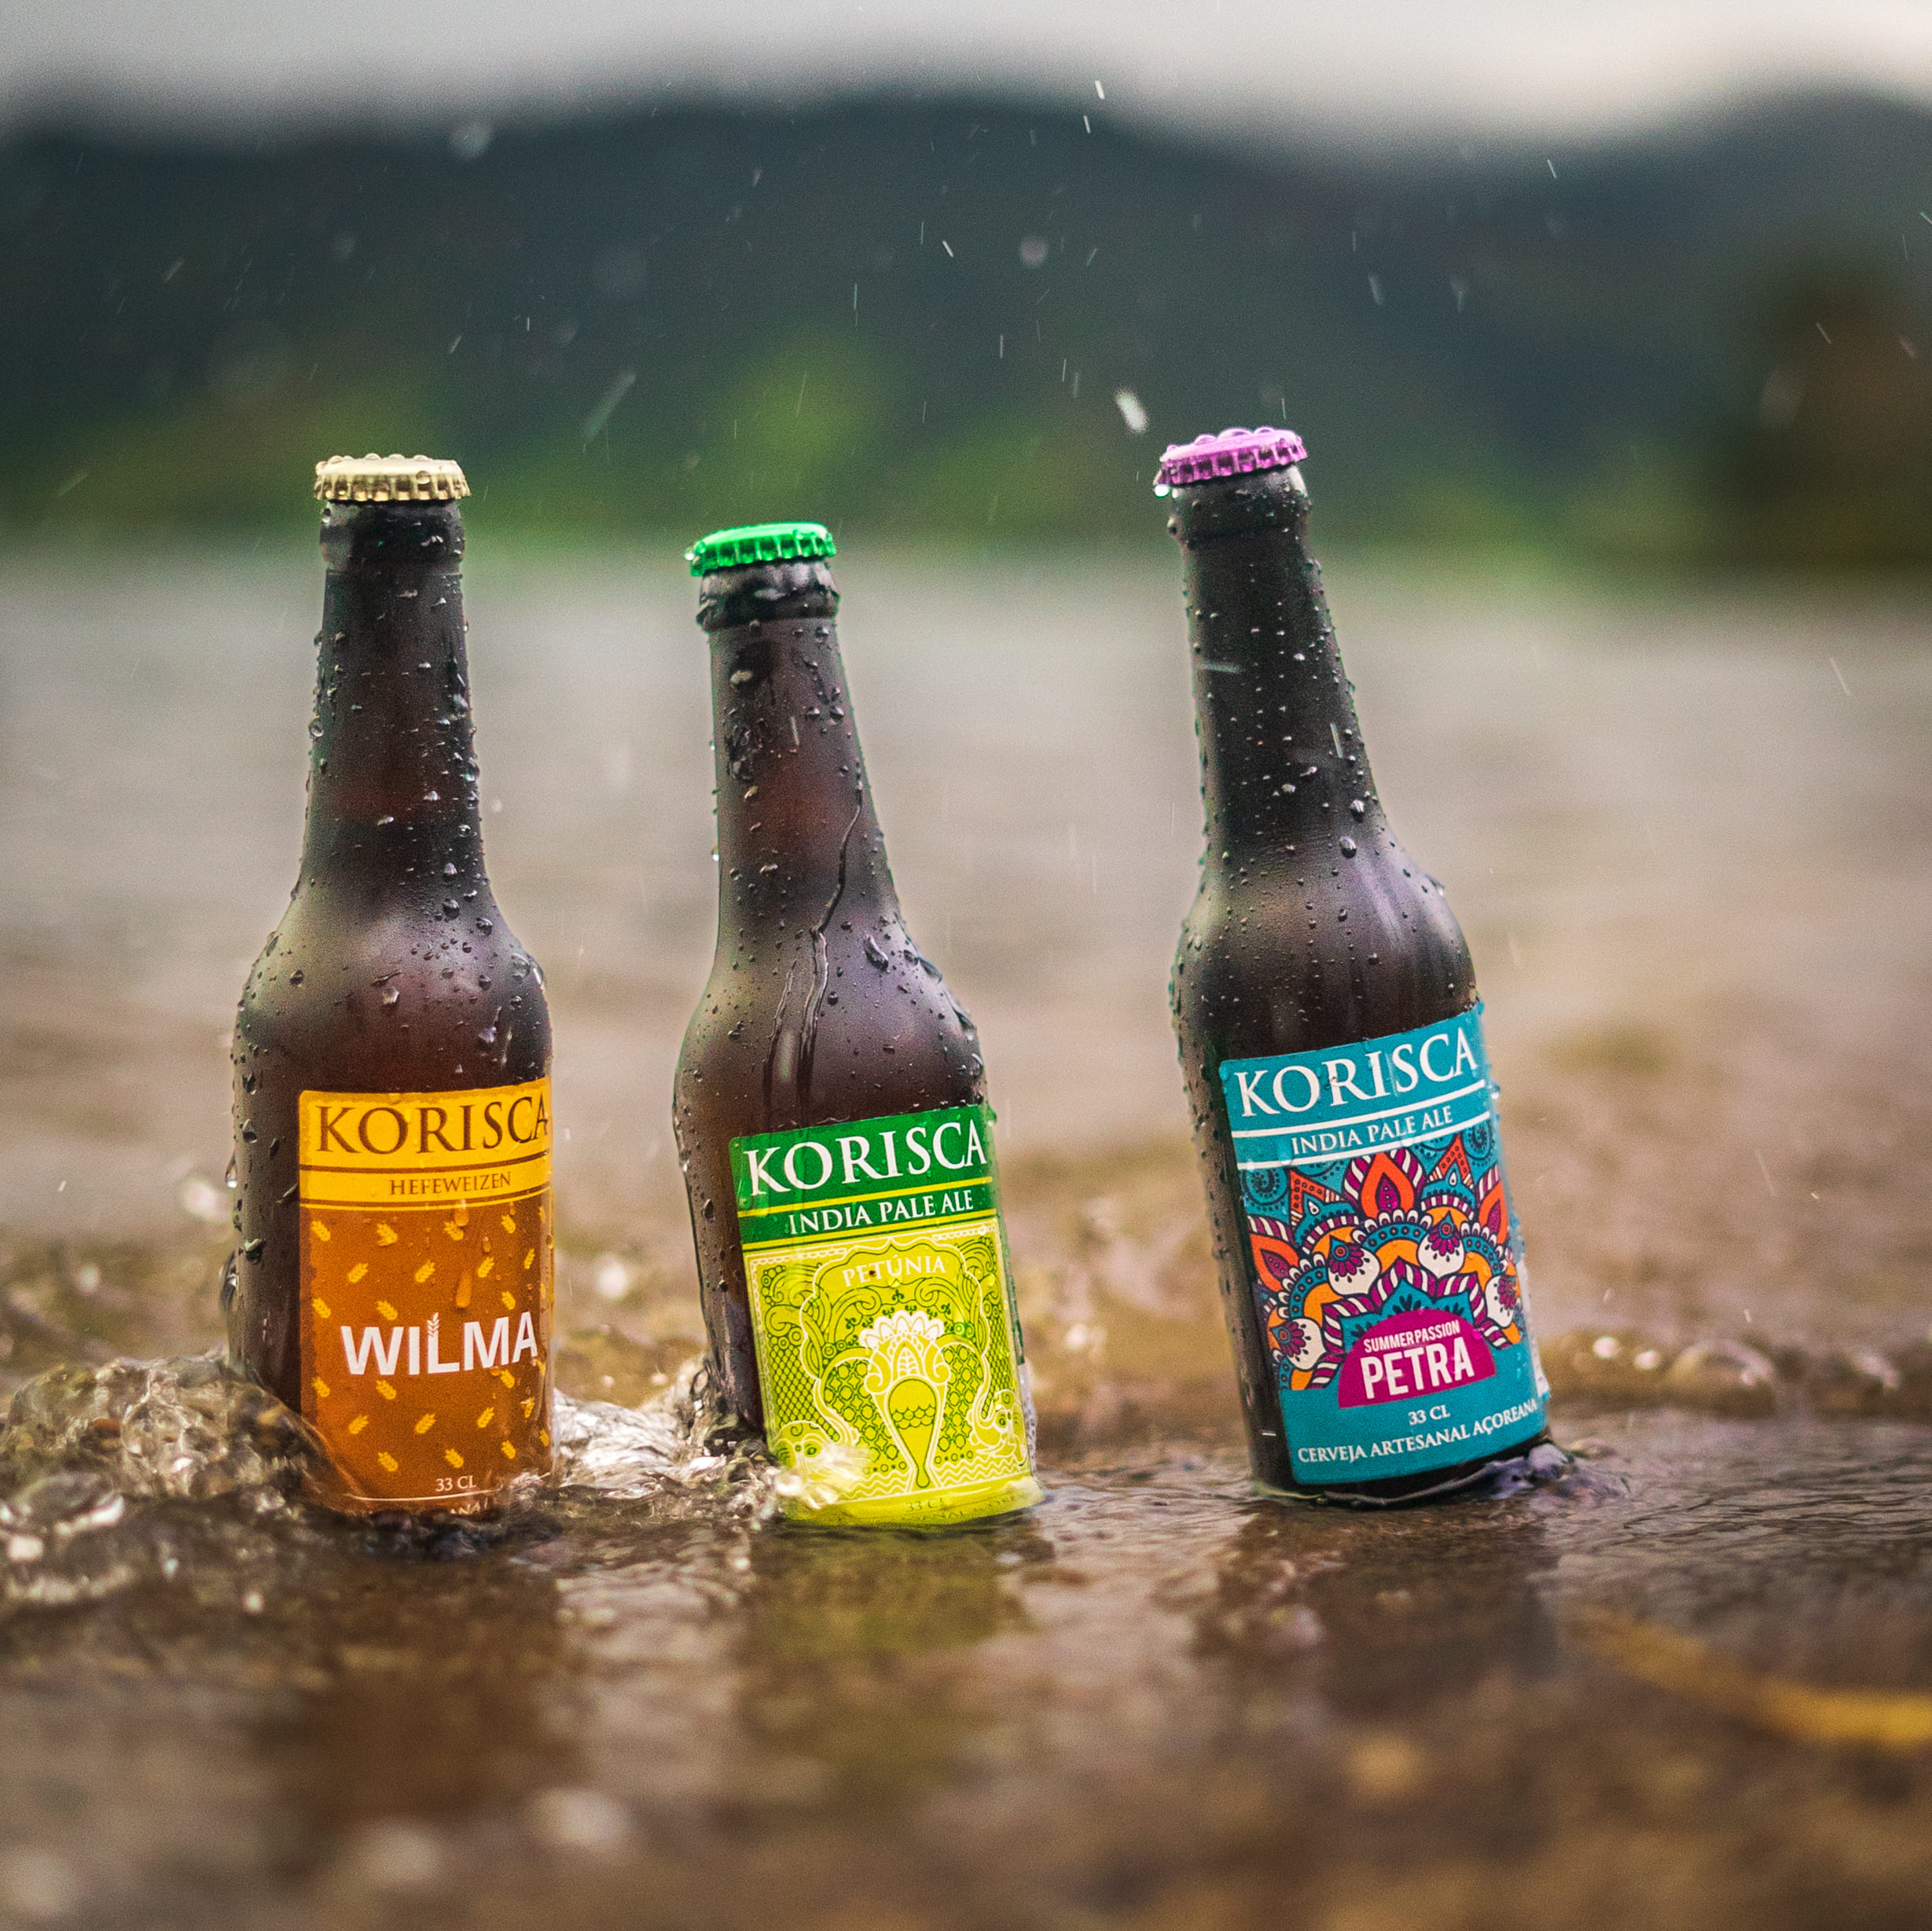 Three Korisca craft beers, the Wilma (Hefeweizen), the Petunia (IPA) and the Petra (IPA), in the water, with splashes and a mountainous valley in the background, at the Sete Cidades Lagoon, Ponta Delgada, São Miguel, Azores.